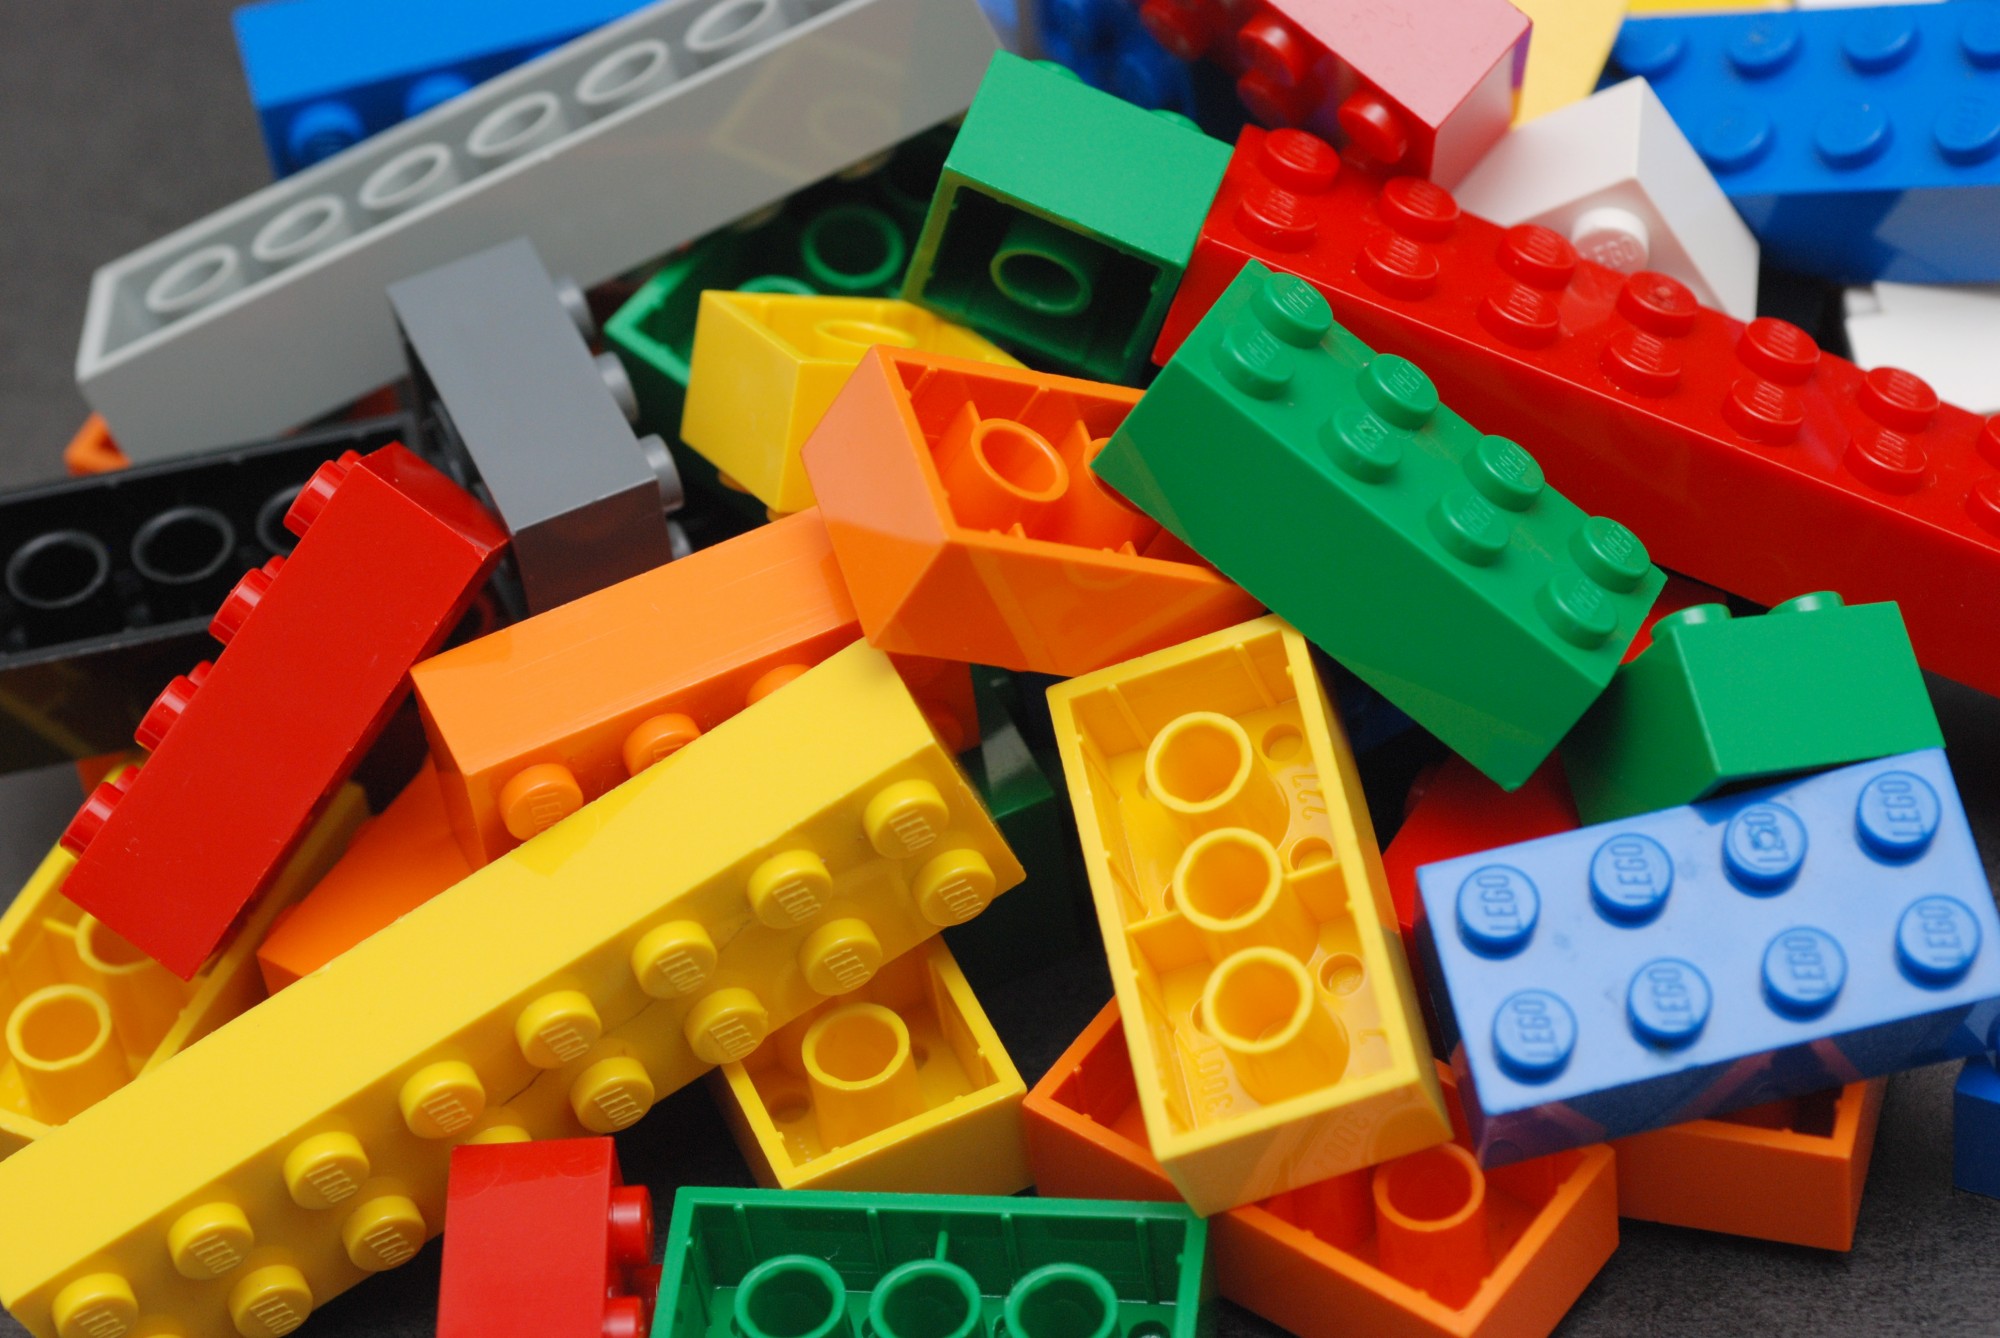 LEGO Is Ditching Plastic In Favor Of Sustainable Materials...